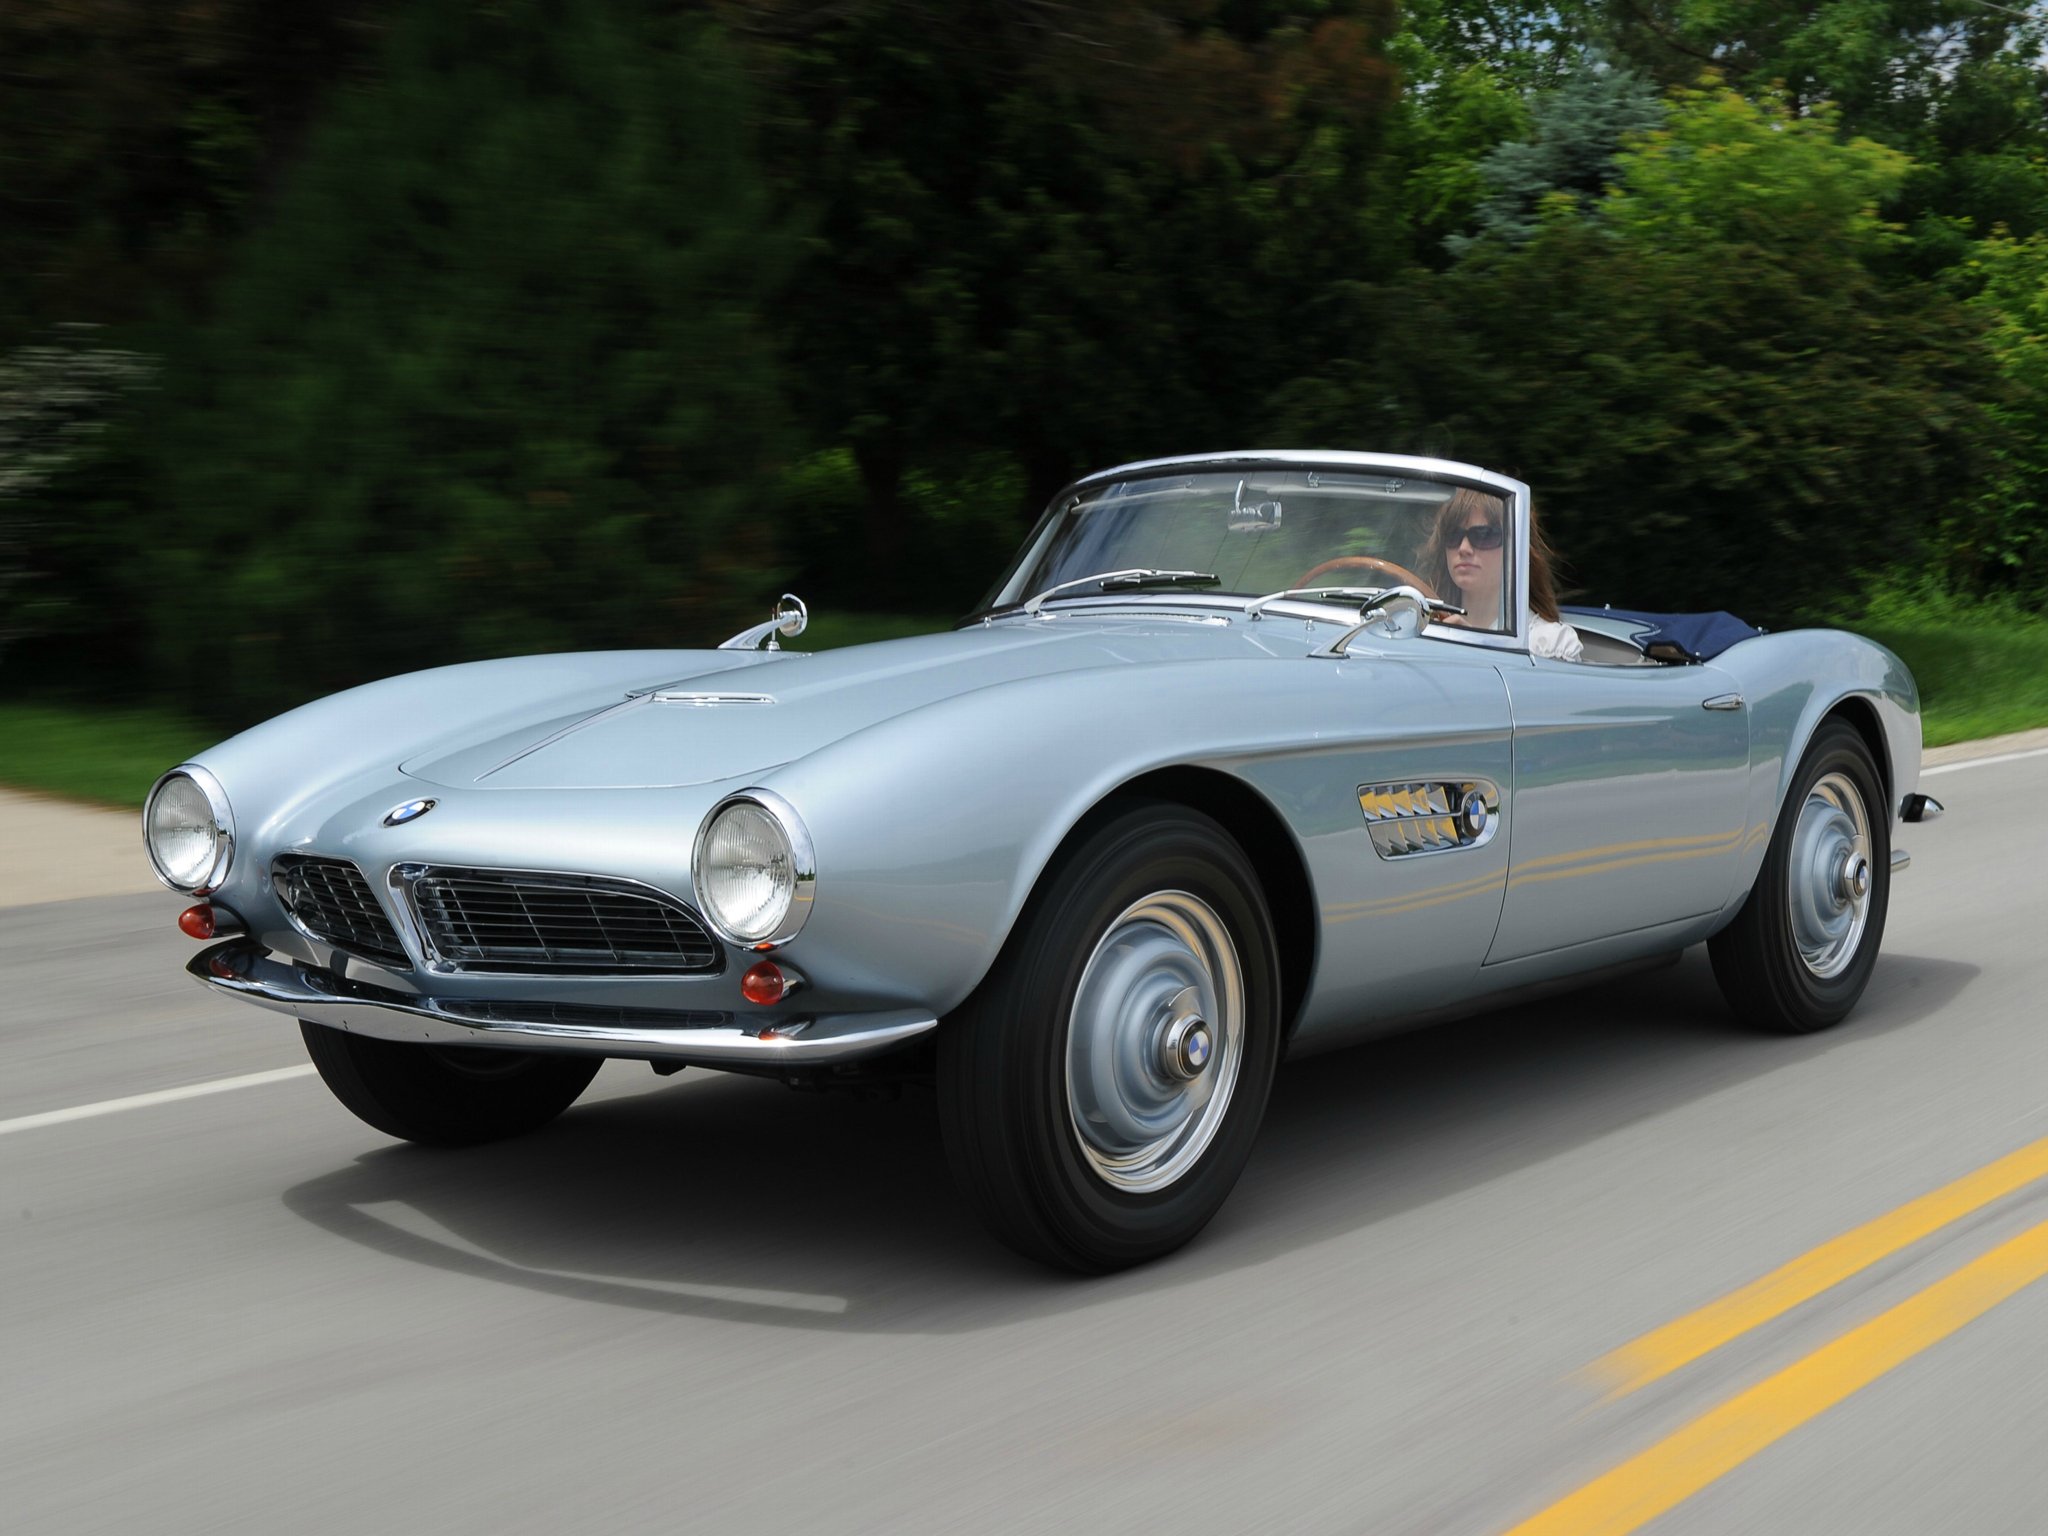 BMW 507 Roadster 1956 wallup net 677496-bmw-507-series-i-1956-classic-cars-convertible